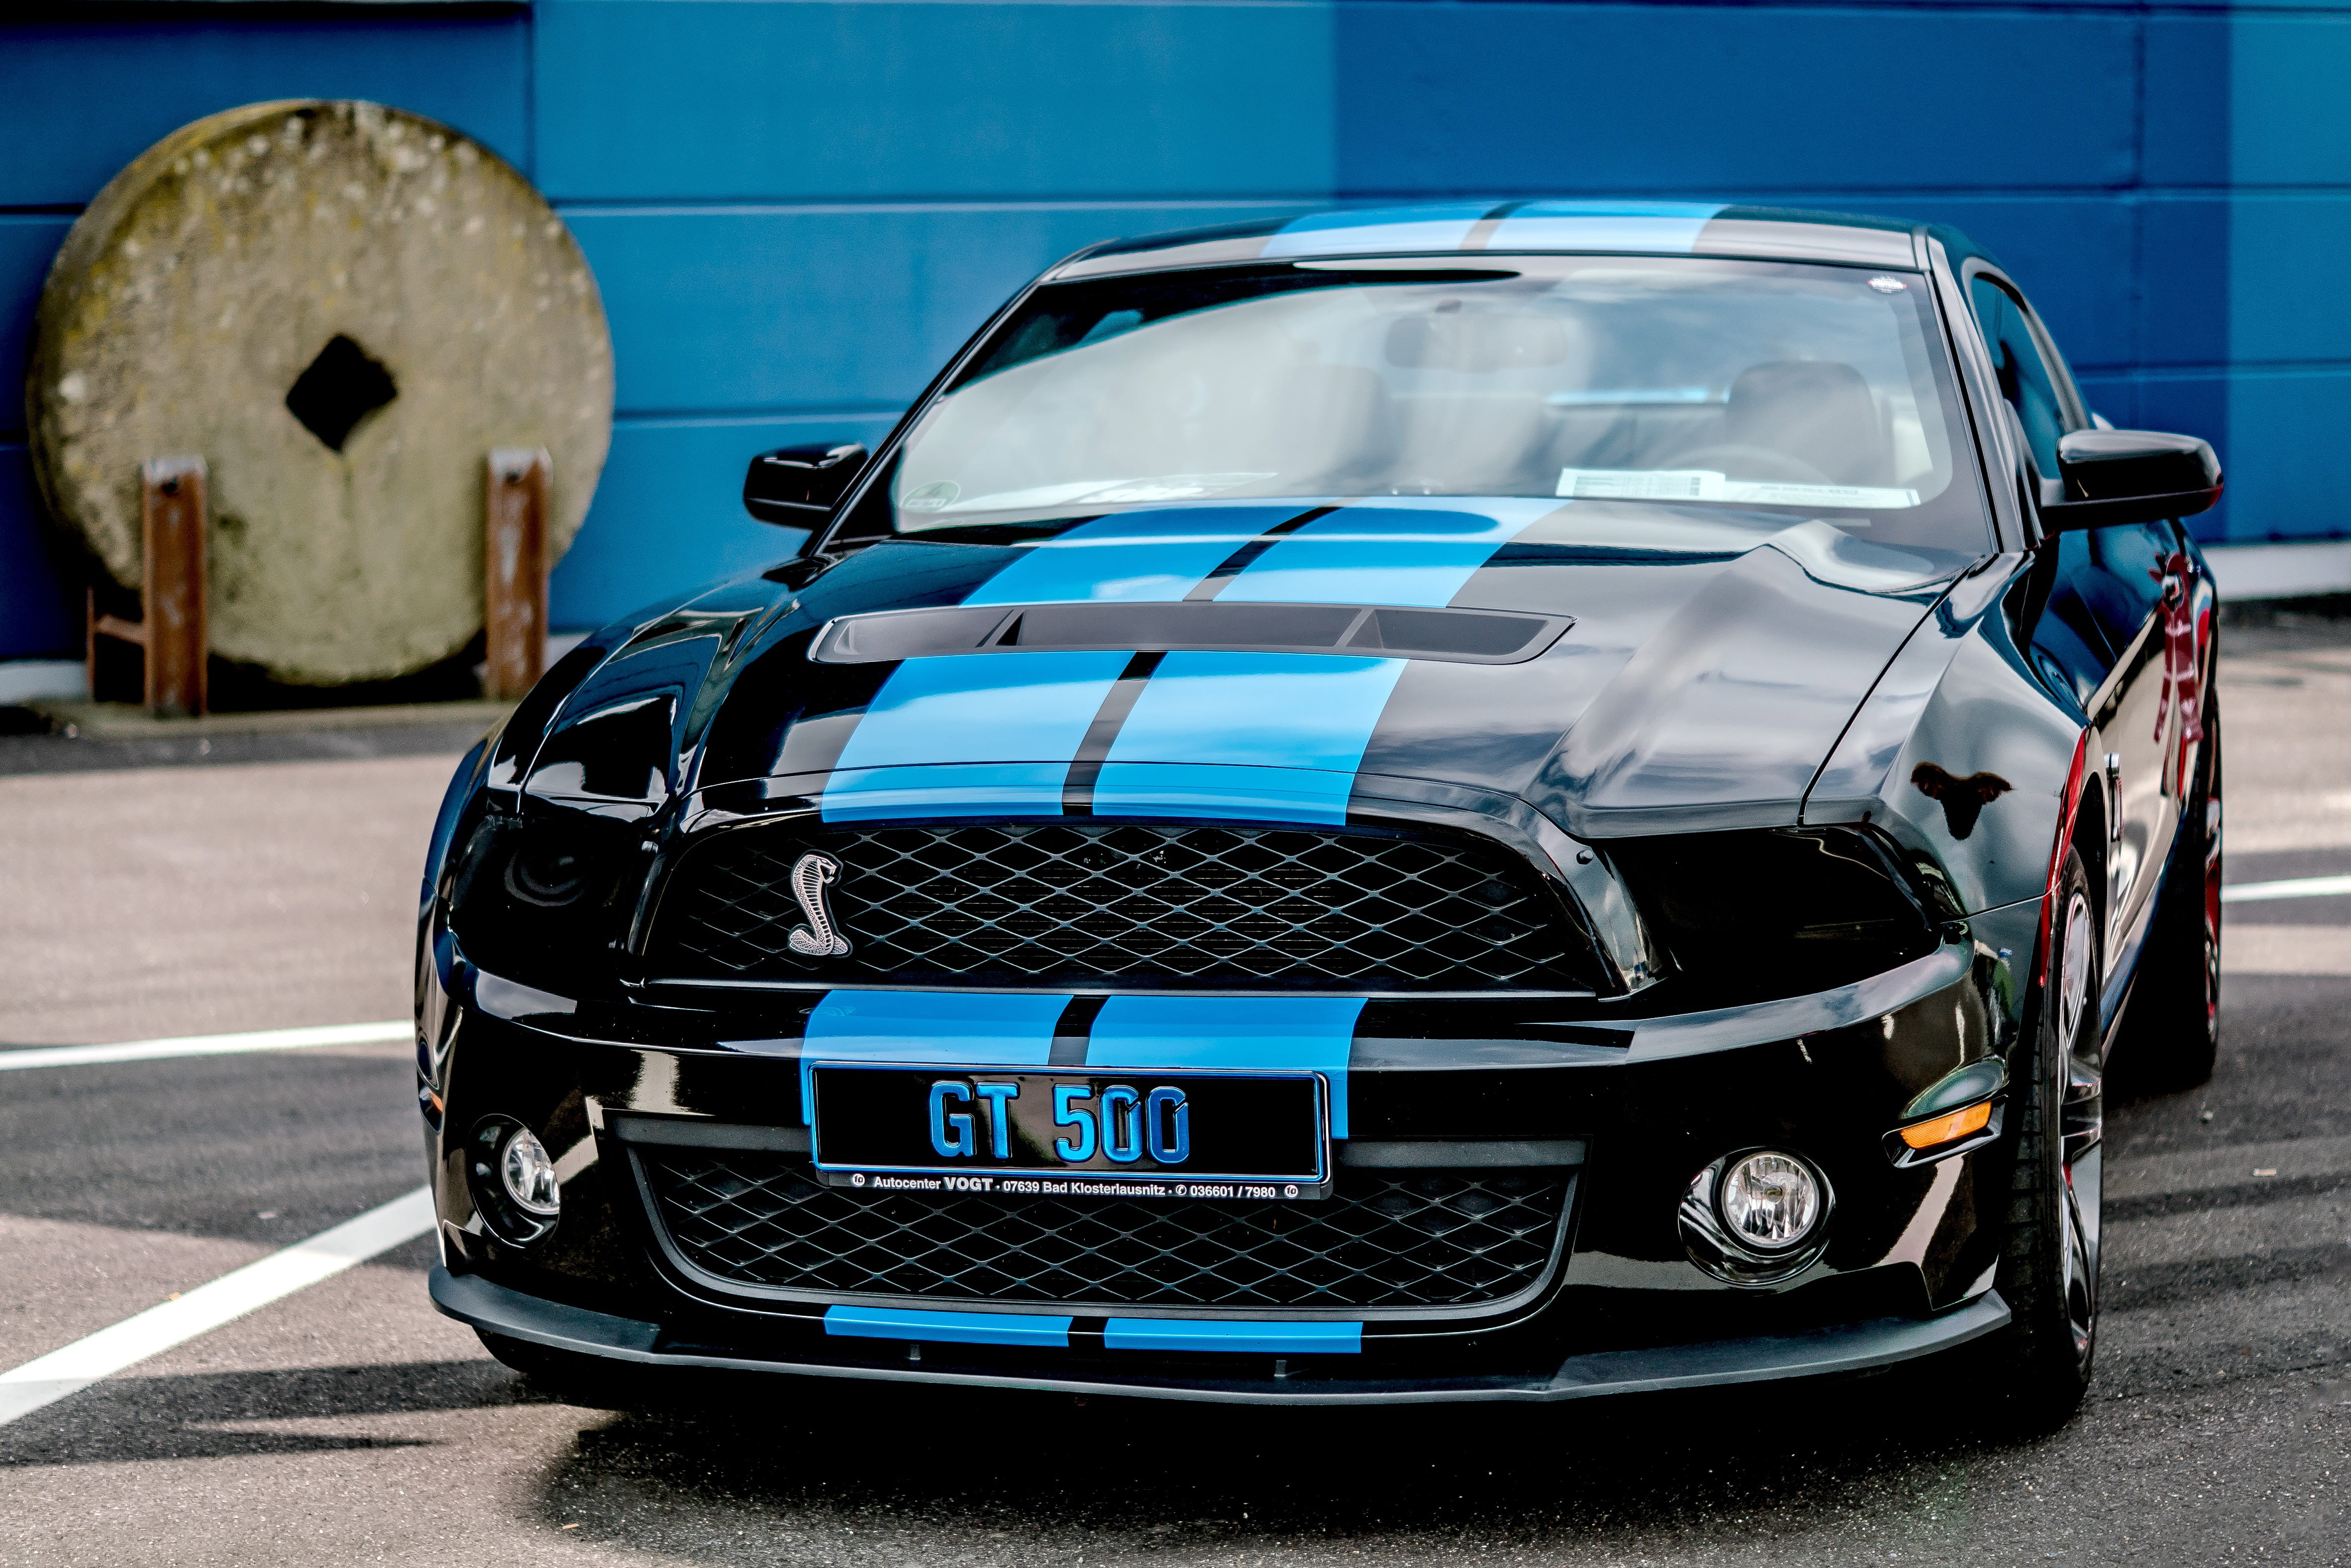 black and blue Ford Mustang GT 500 coupe on asphalt surface, auto